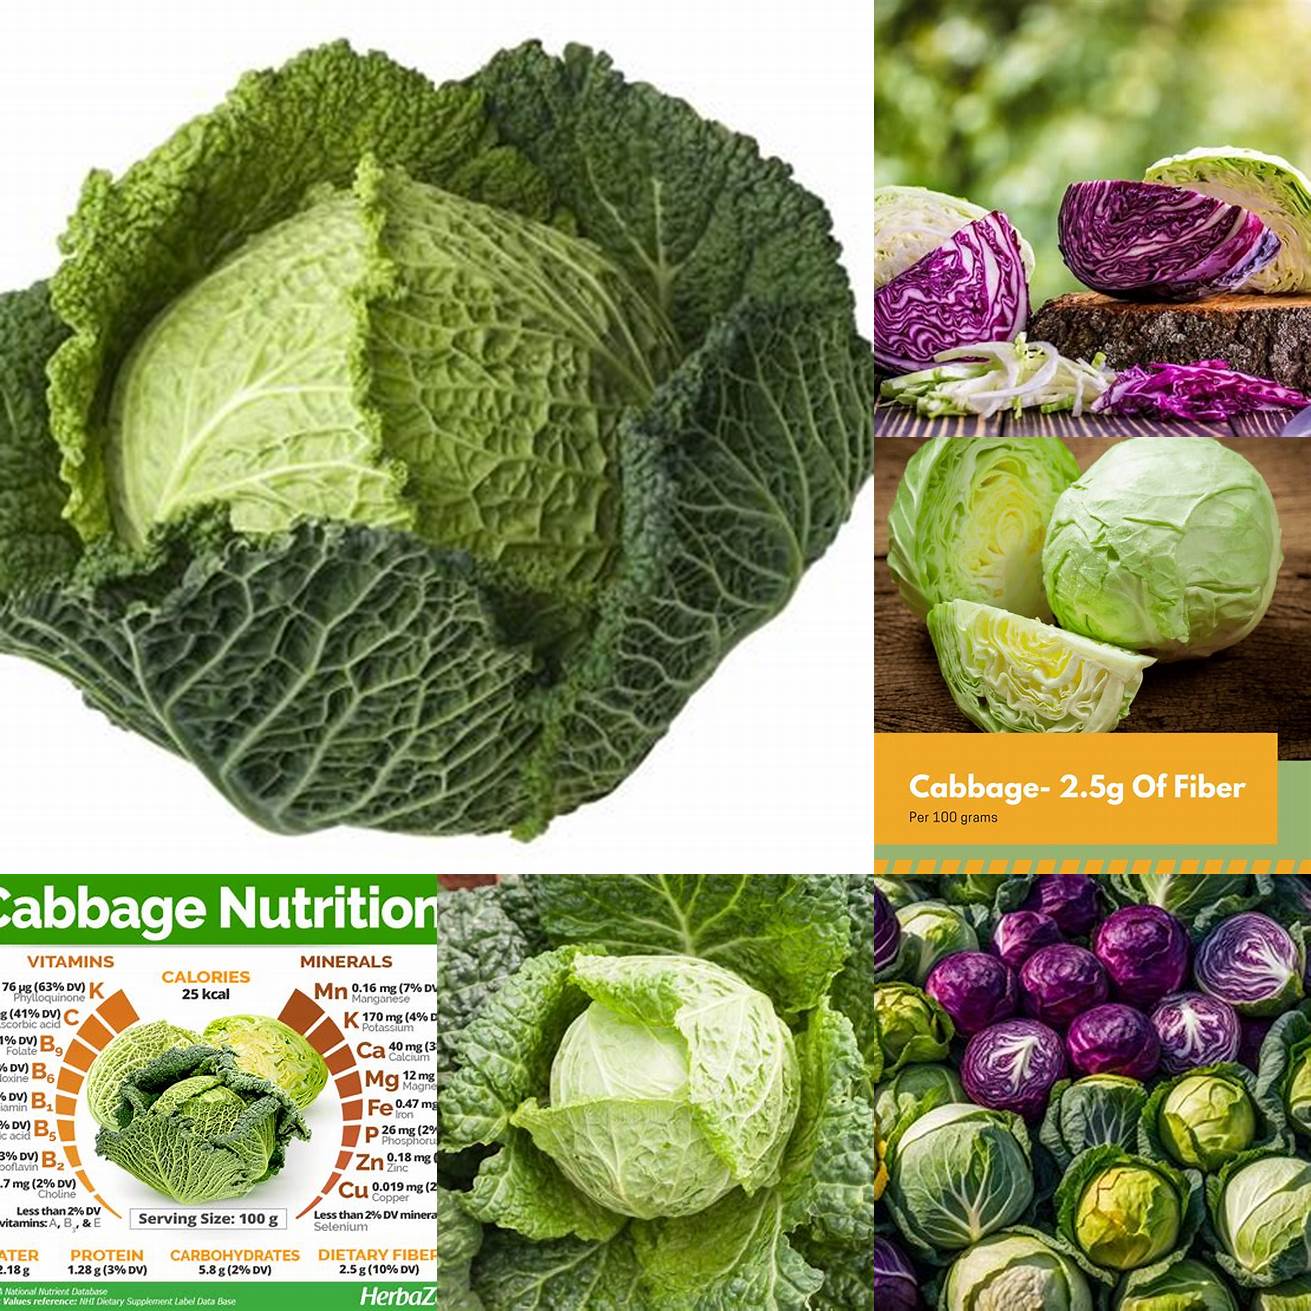 Cabbage can be a good source of fiber for cats which can help support their digestive health